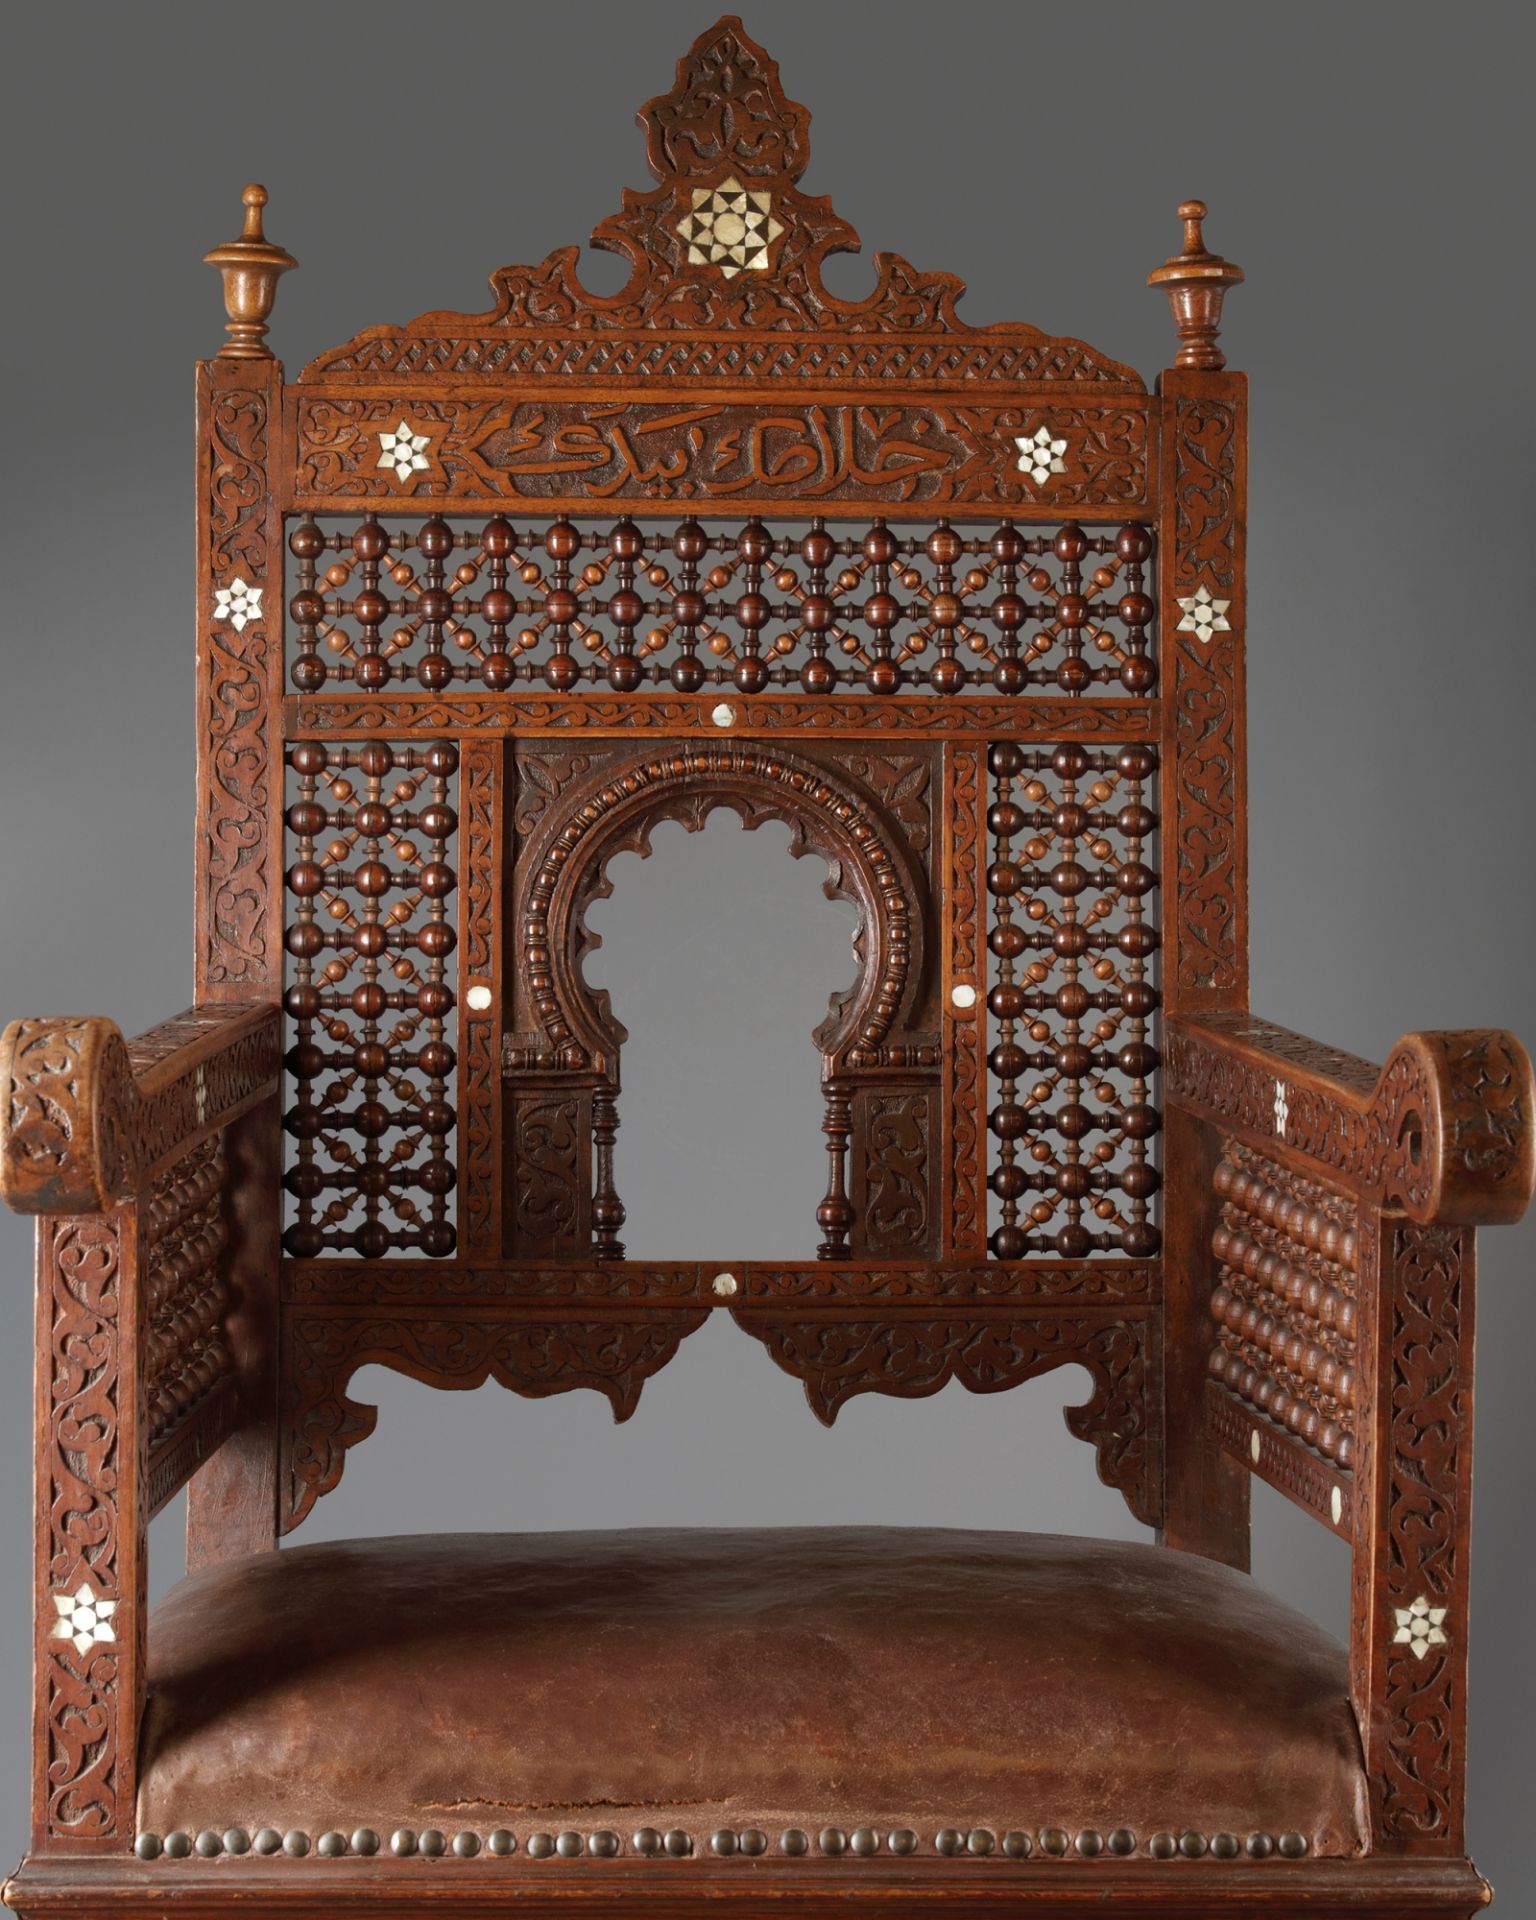 FOUR SYRIAN MOTHER-OF-PEARL INLAID WOODEN CHAIRS AND TABLE SYRIA-DAMASCUS, LATE 19TH CENTURY - Image 3 of 6